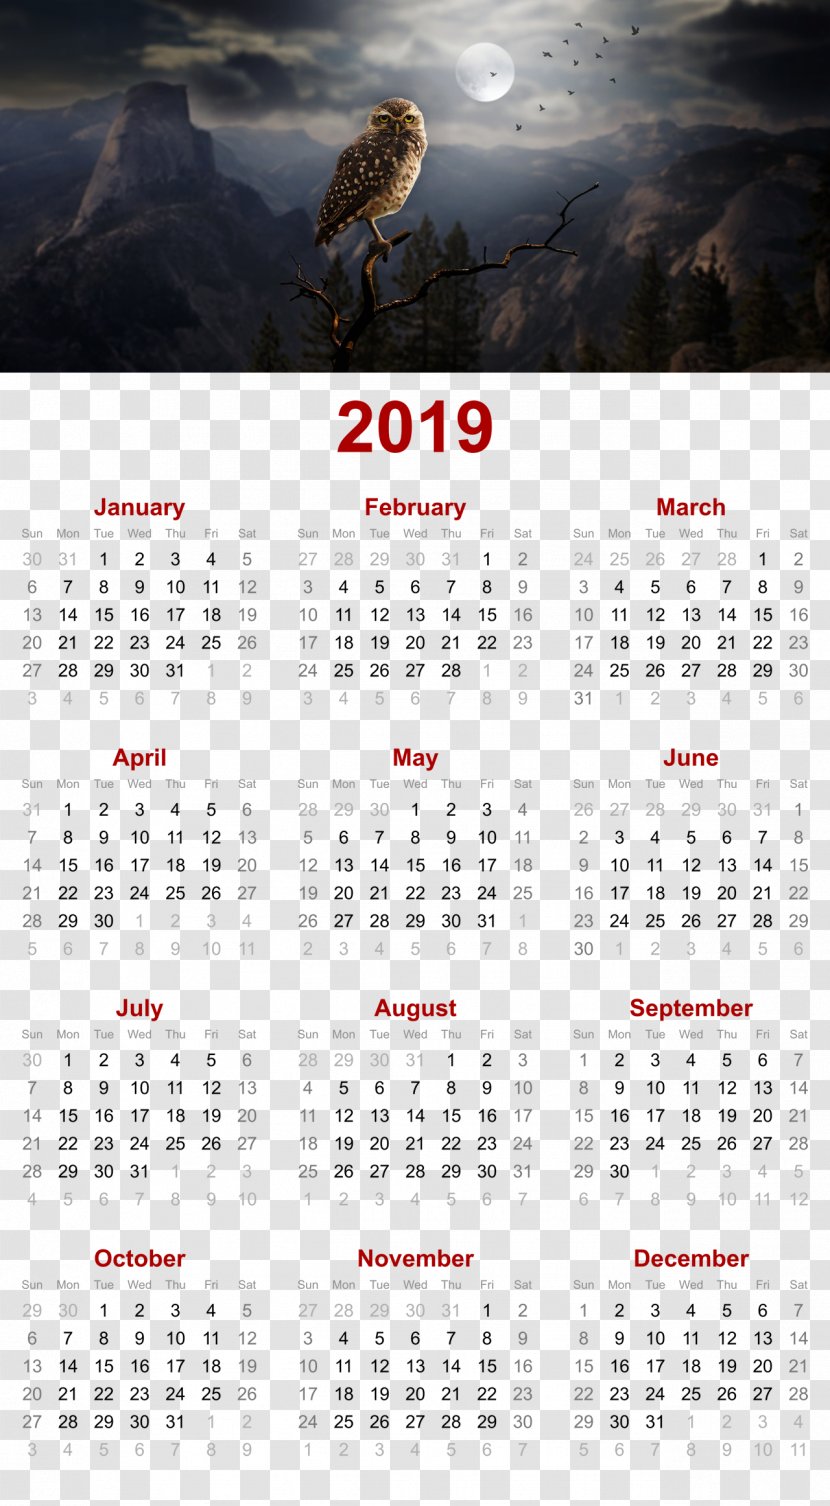 2019 Printable Calendar - Template - Owl In Night Design.Others Transparent PNG